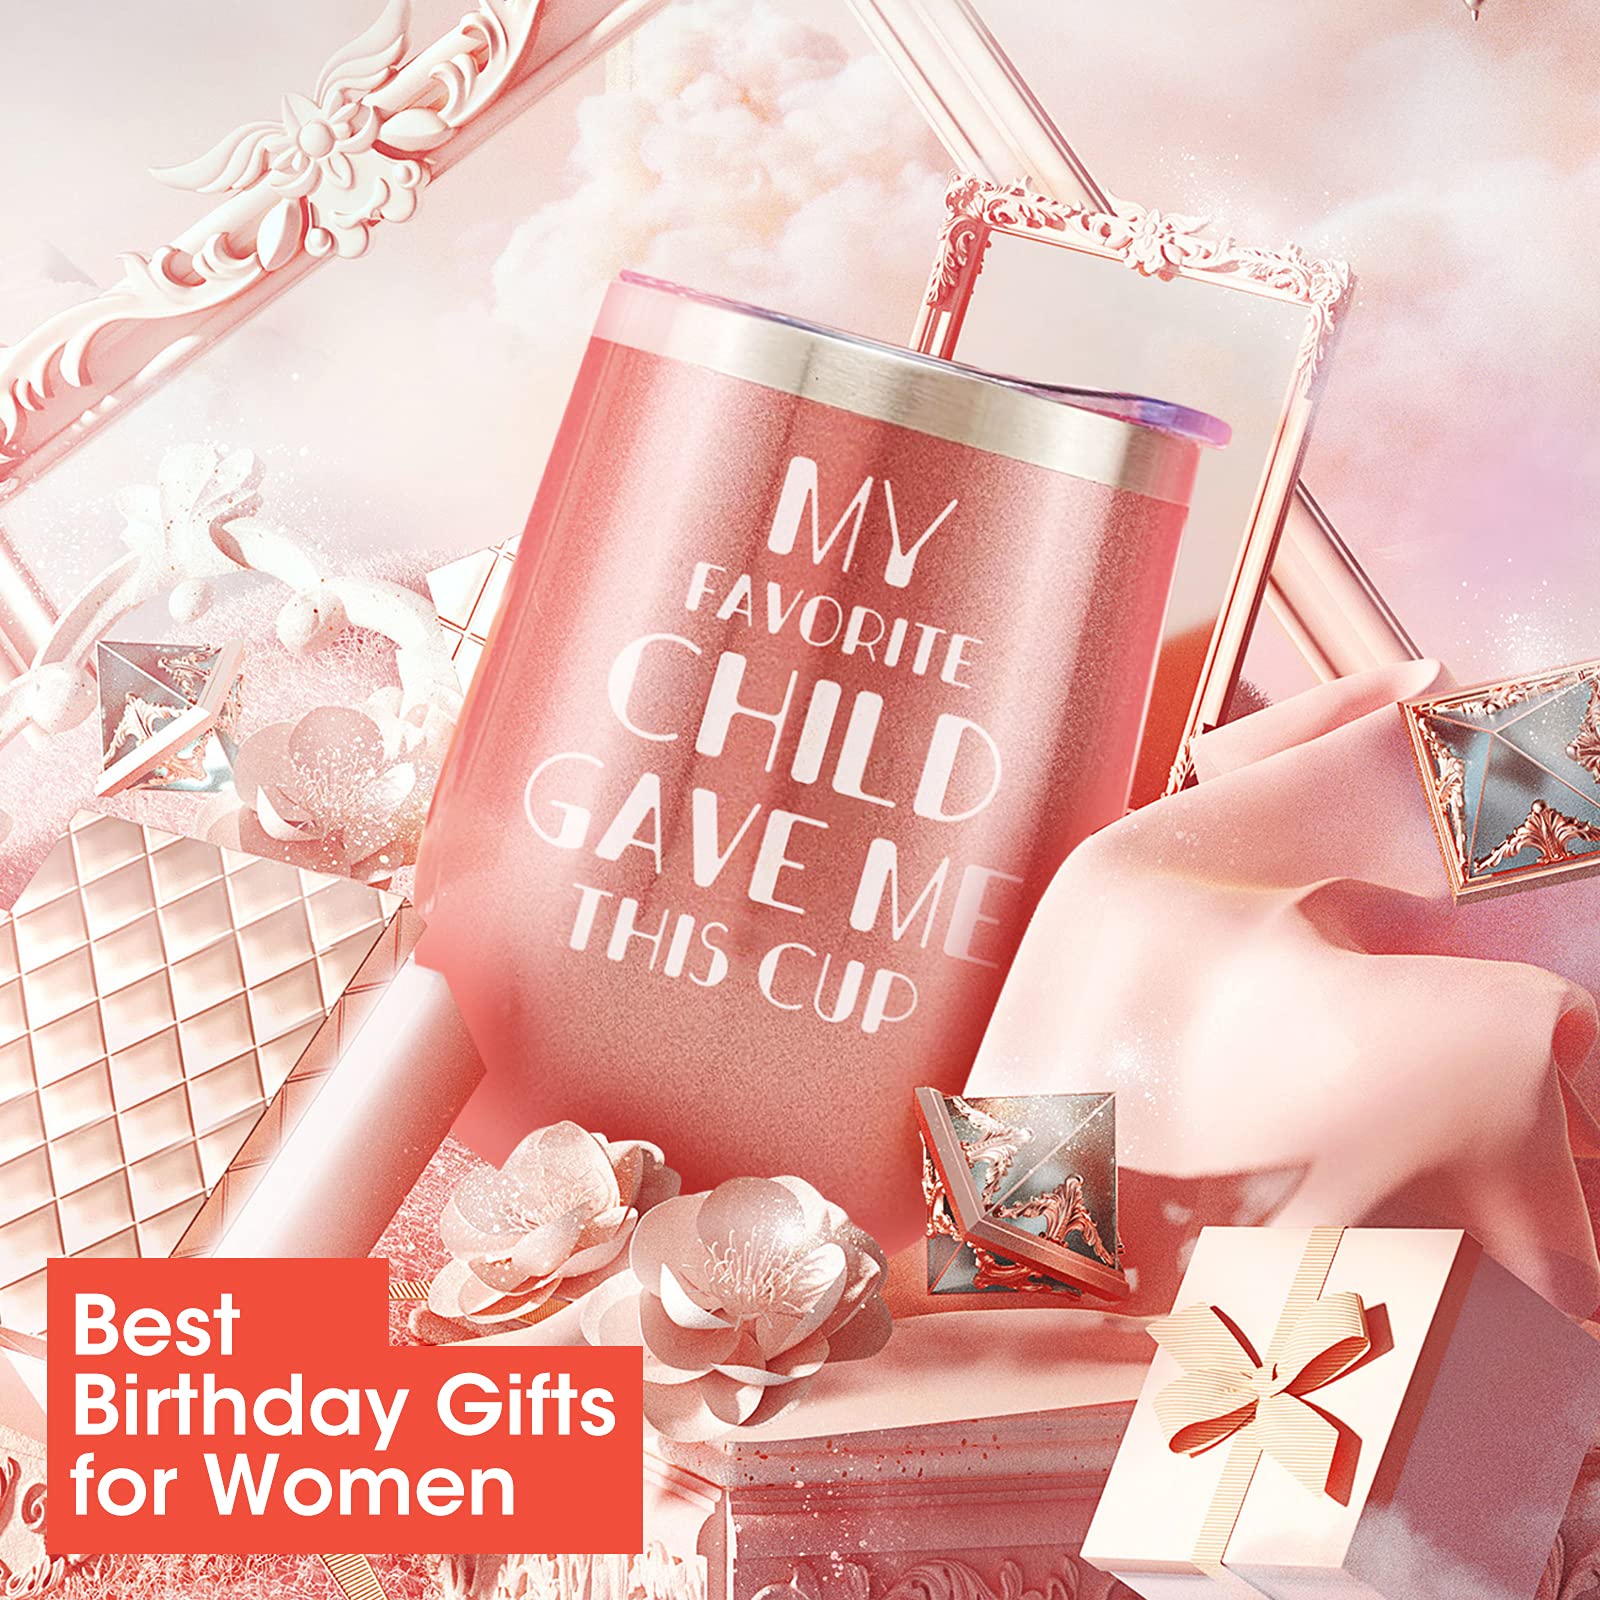 JETIKON Christmas Birthday Gifts for Mom Women My Favorite Child Gave Me This Wine Tumbler Necklace Sock Basket Best Grandma Gifts from Daughter Son Mother’s Day Gifts Boxes 12 Pack